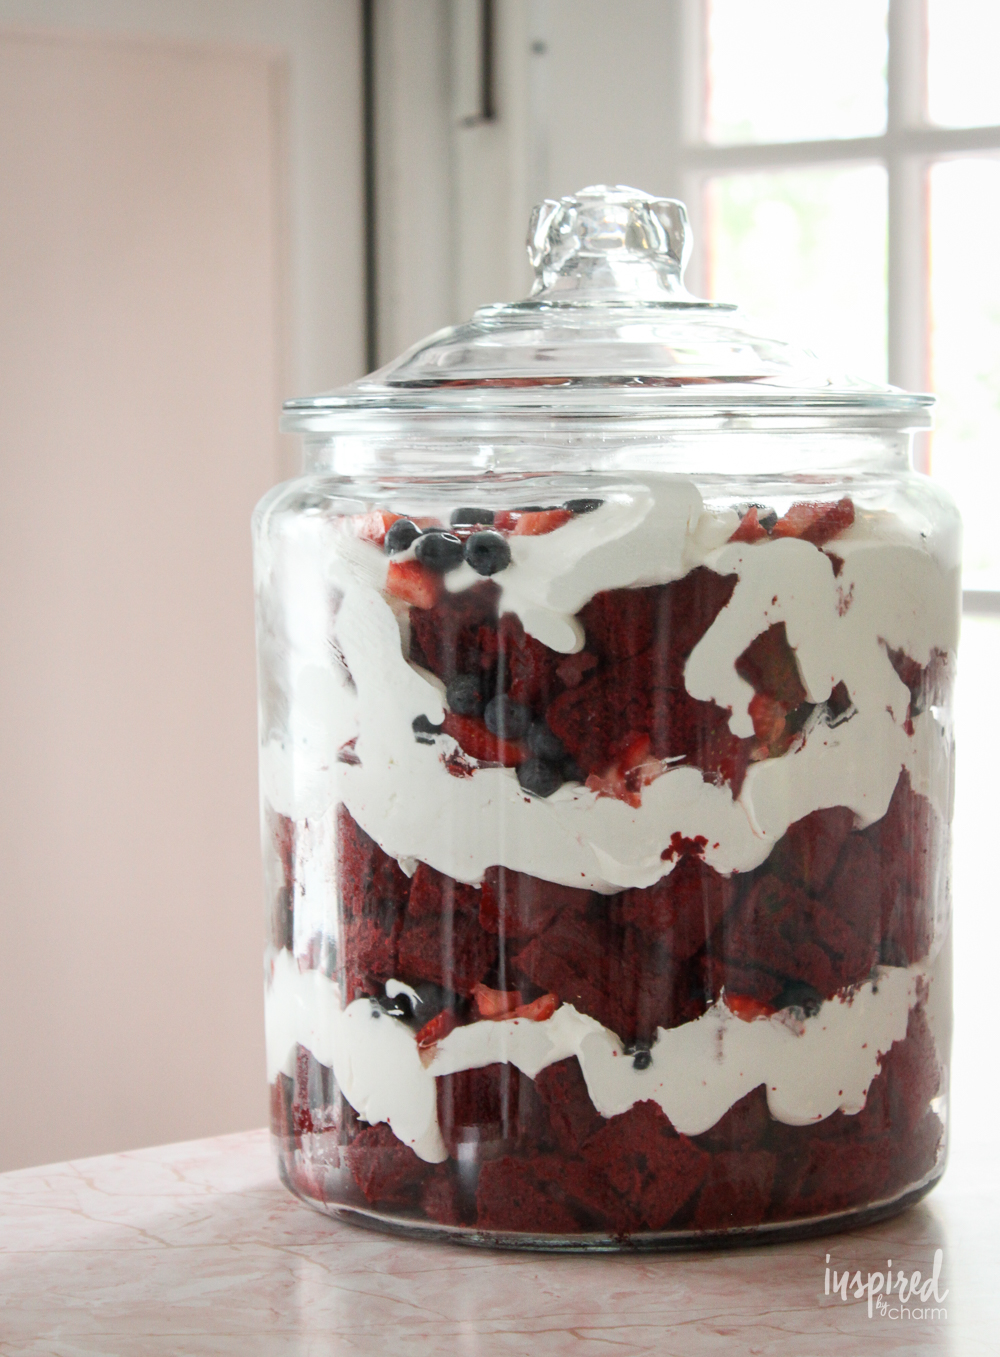 red velvet trifle layered with berries and whipped cream in a large glass jar.